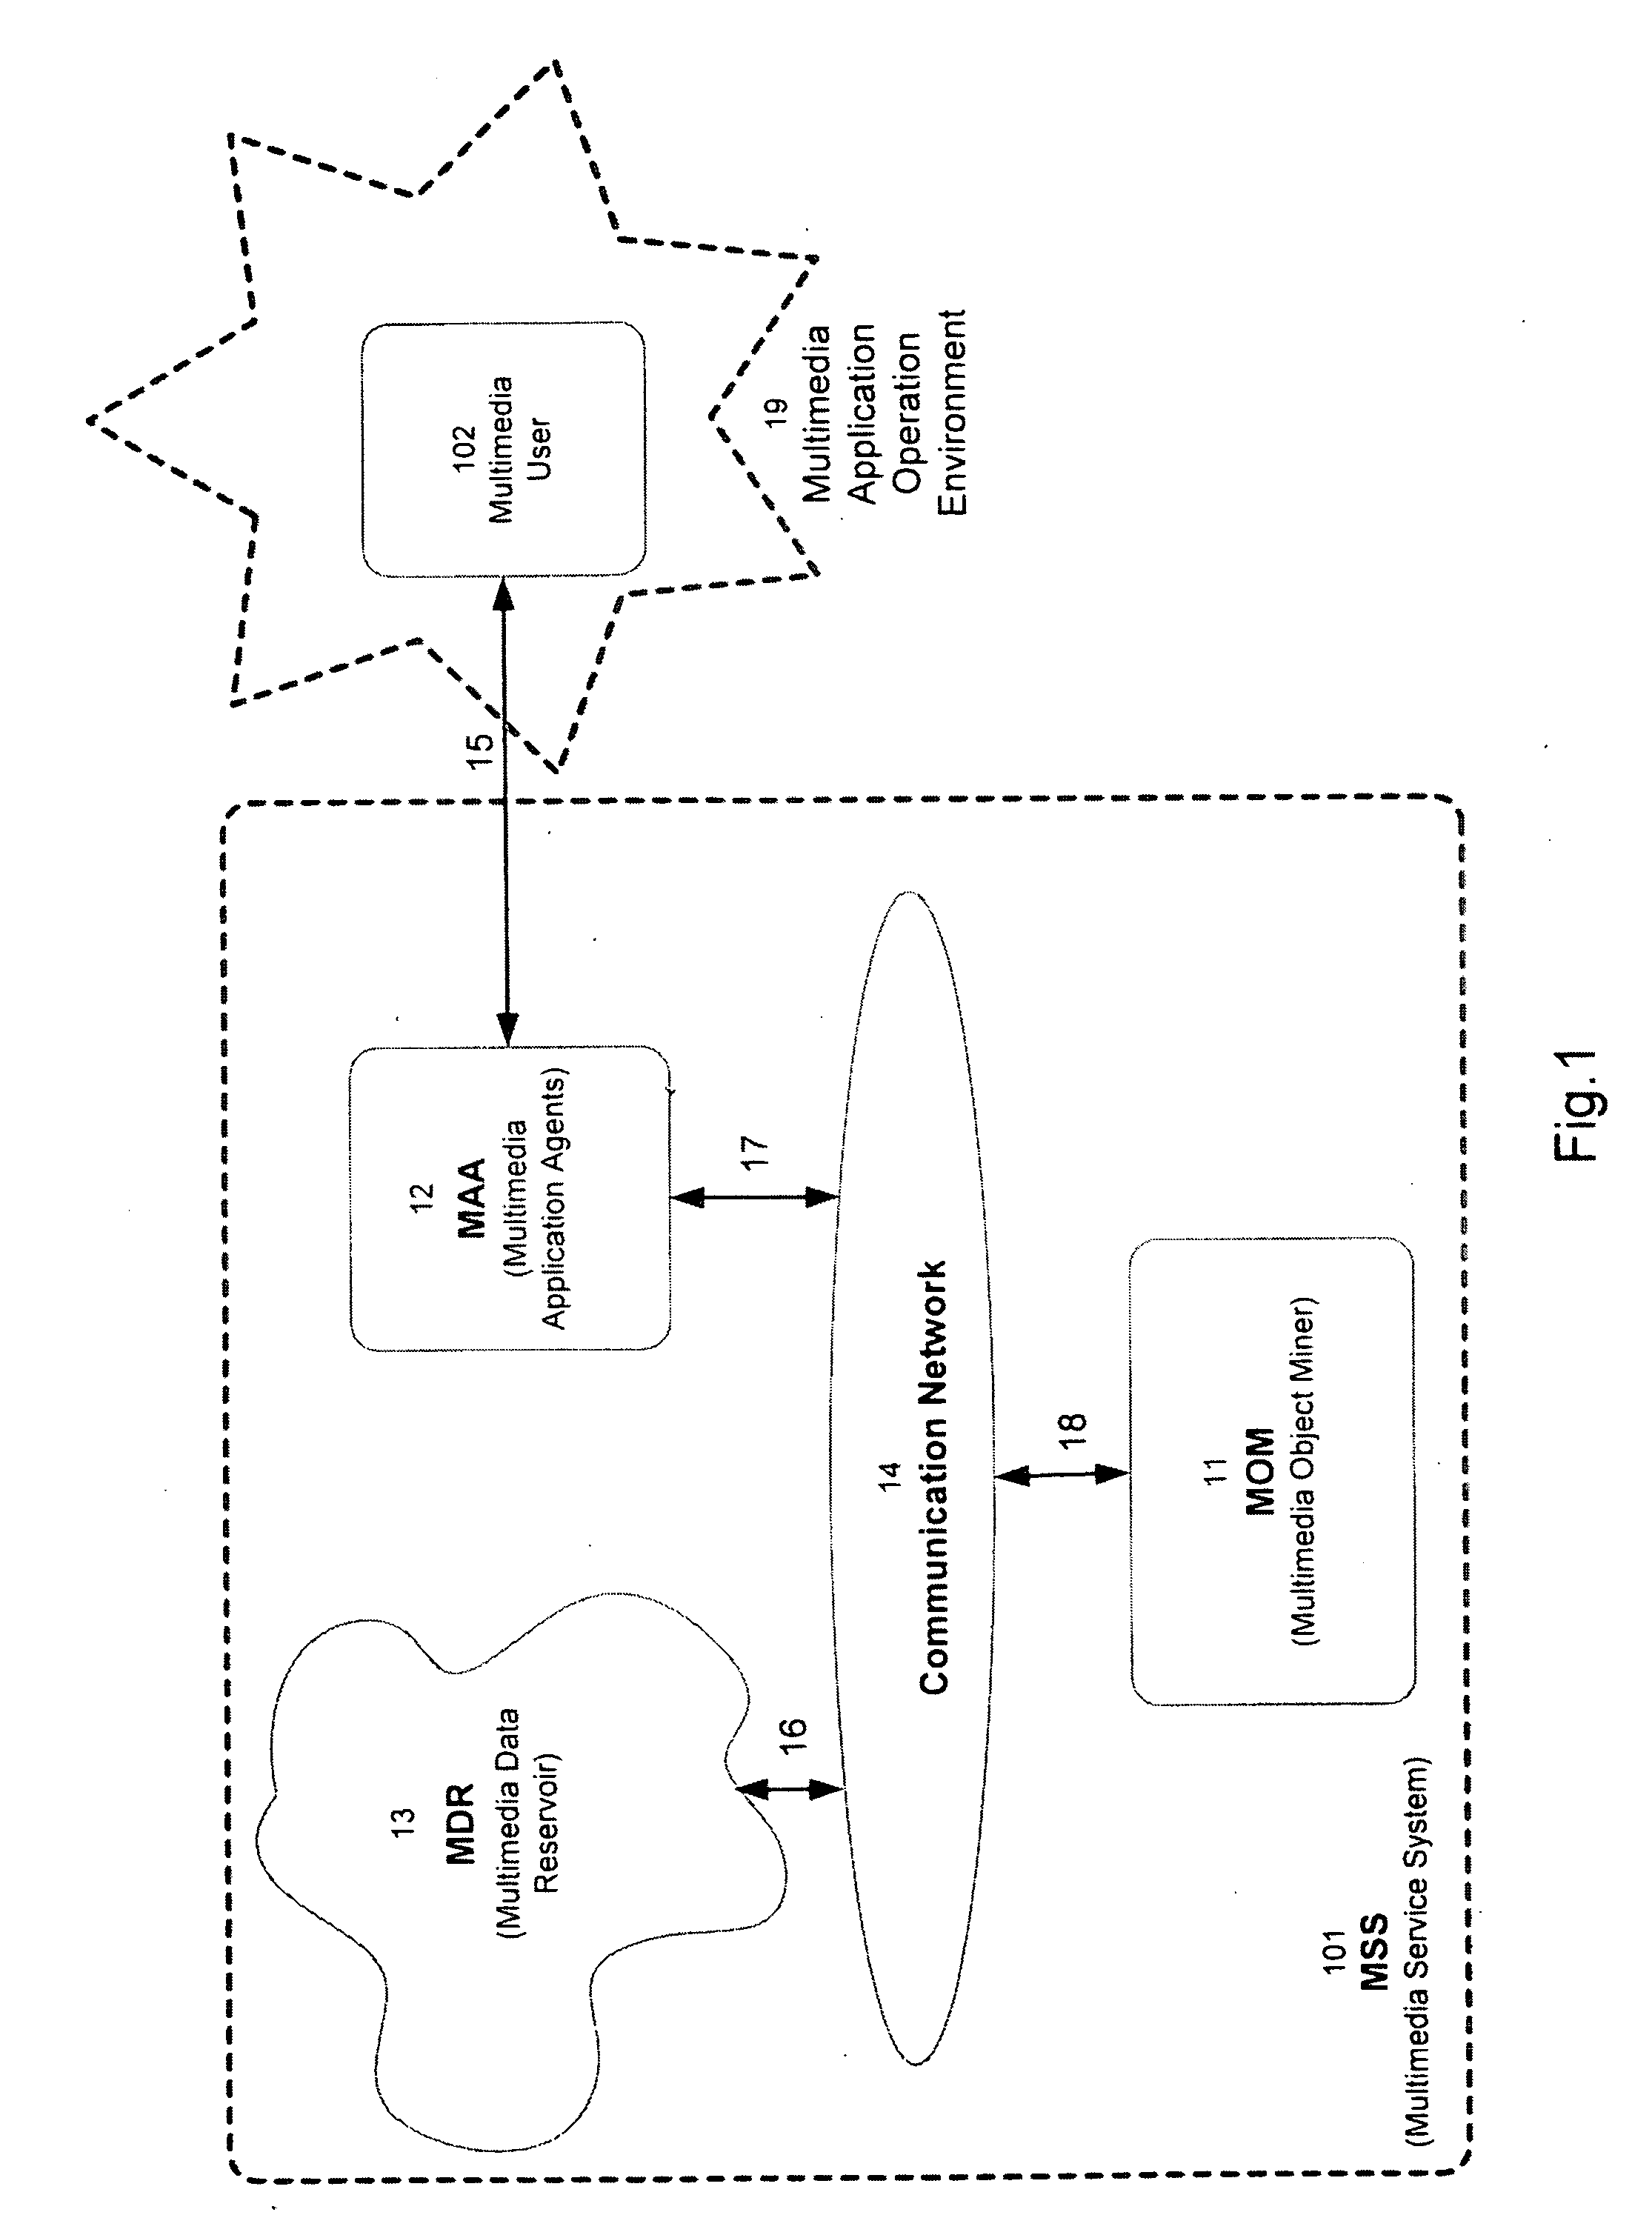 Object-based information storage, search and mining system method